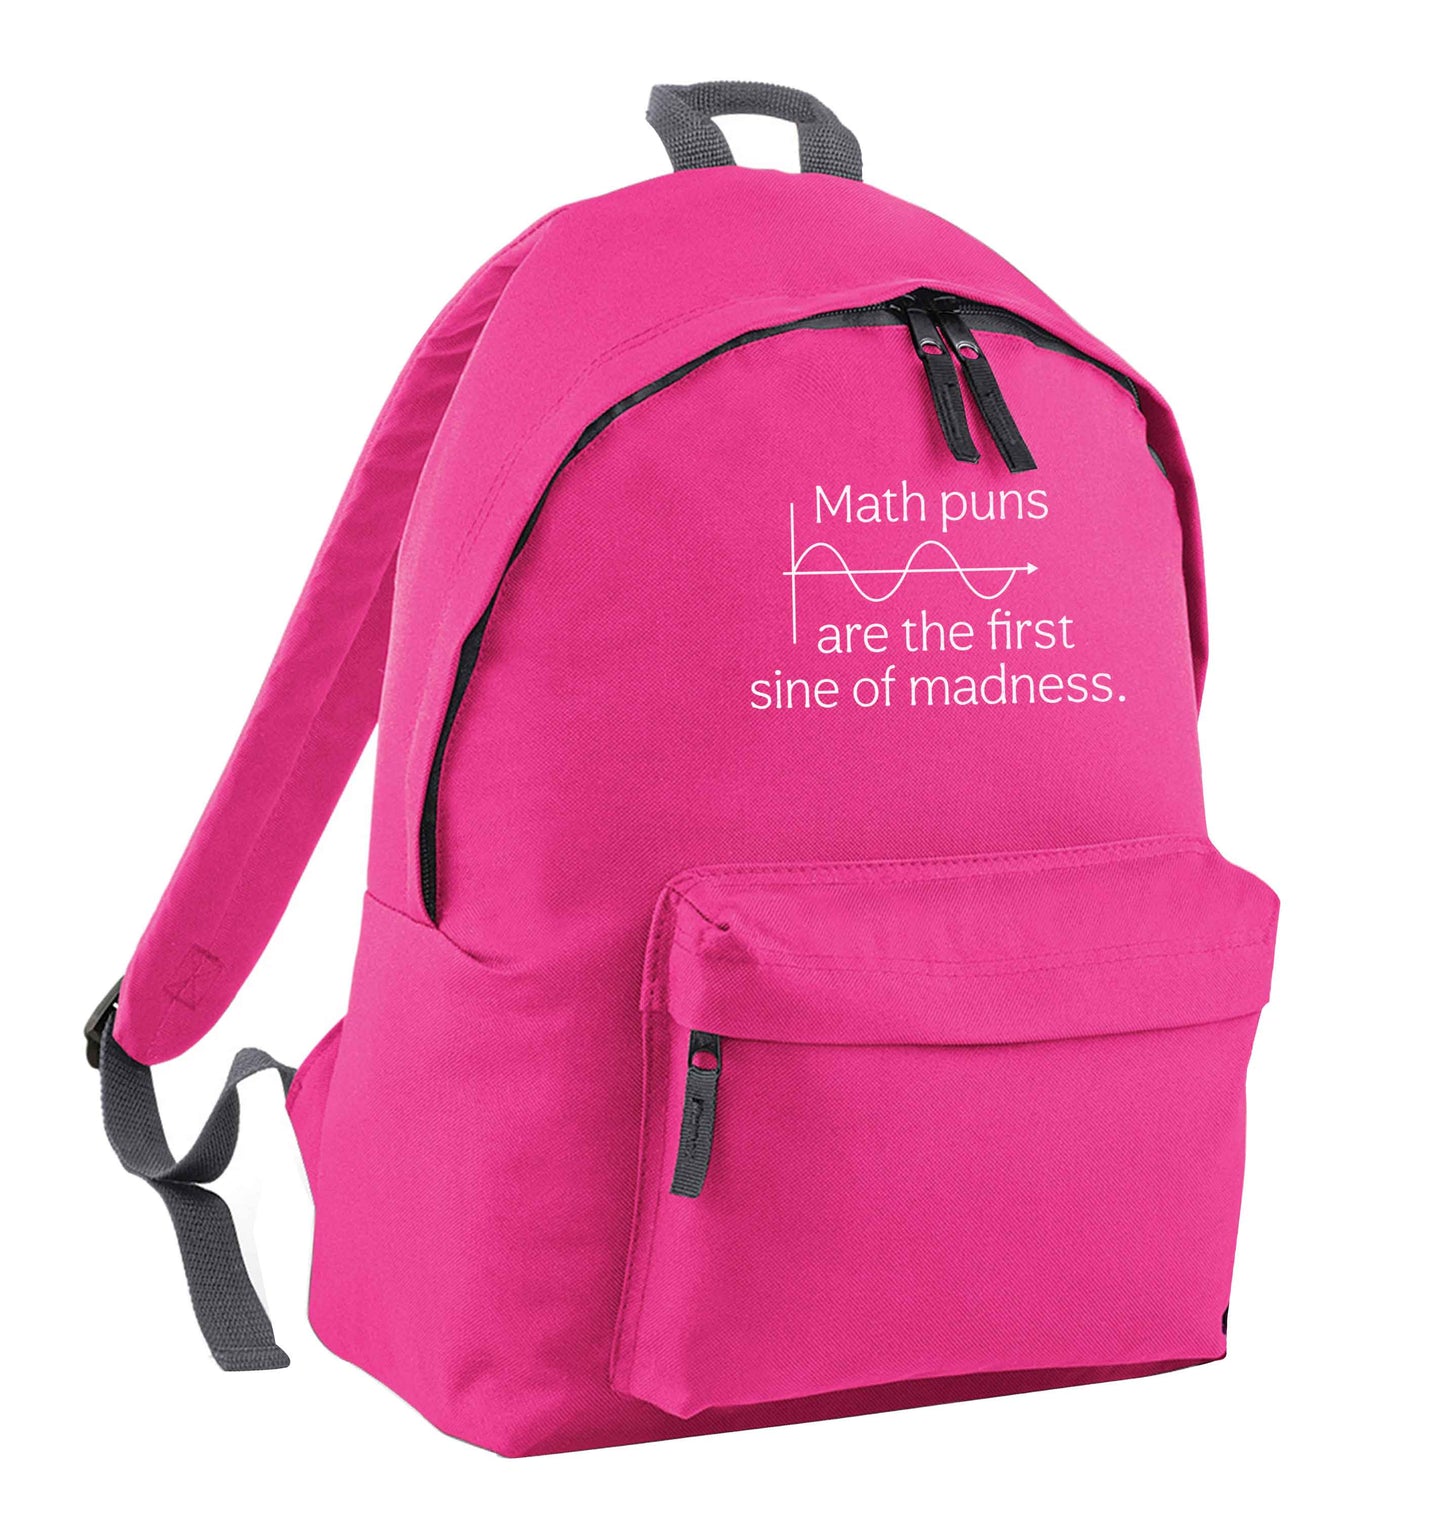 Math puns are the first sine of madness pink children's backpack